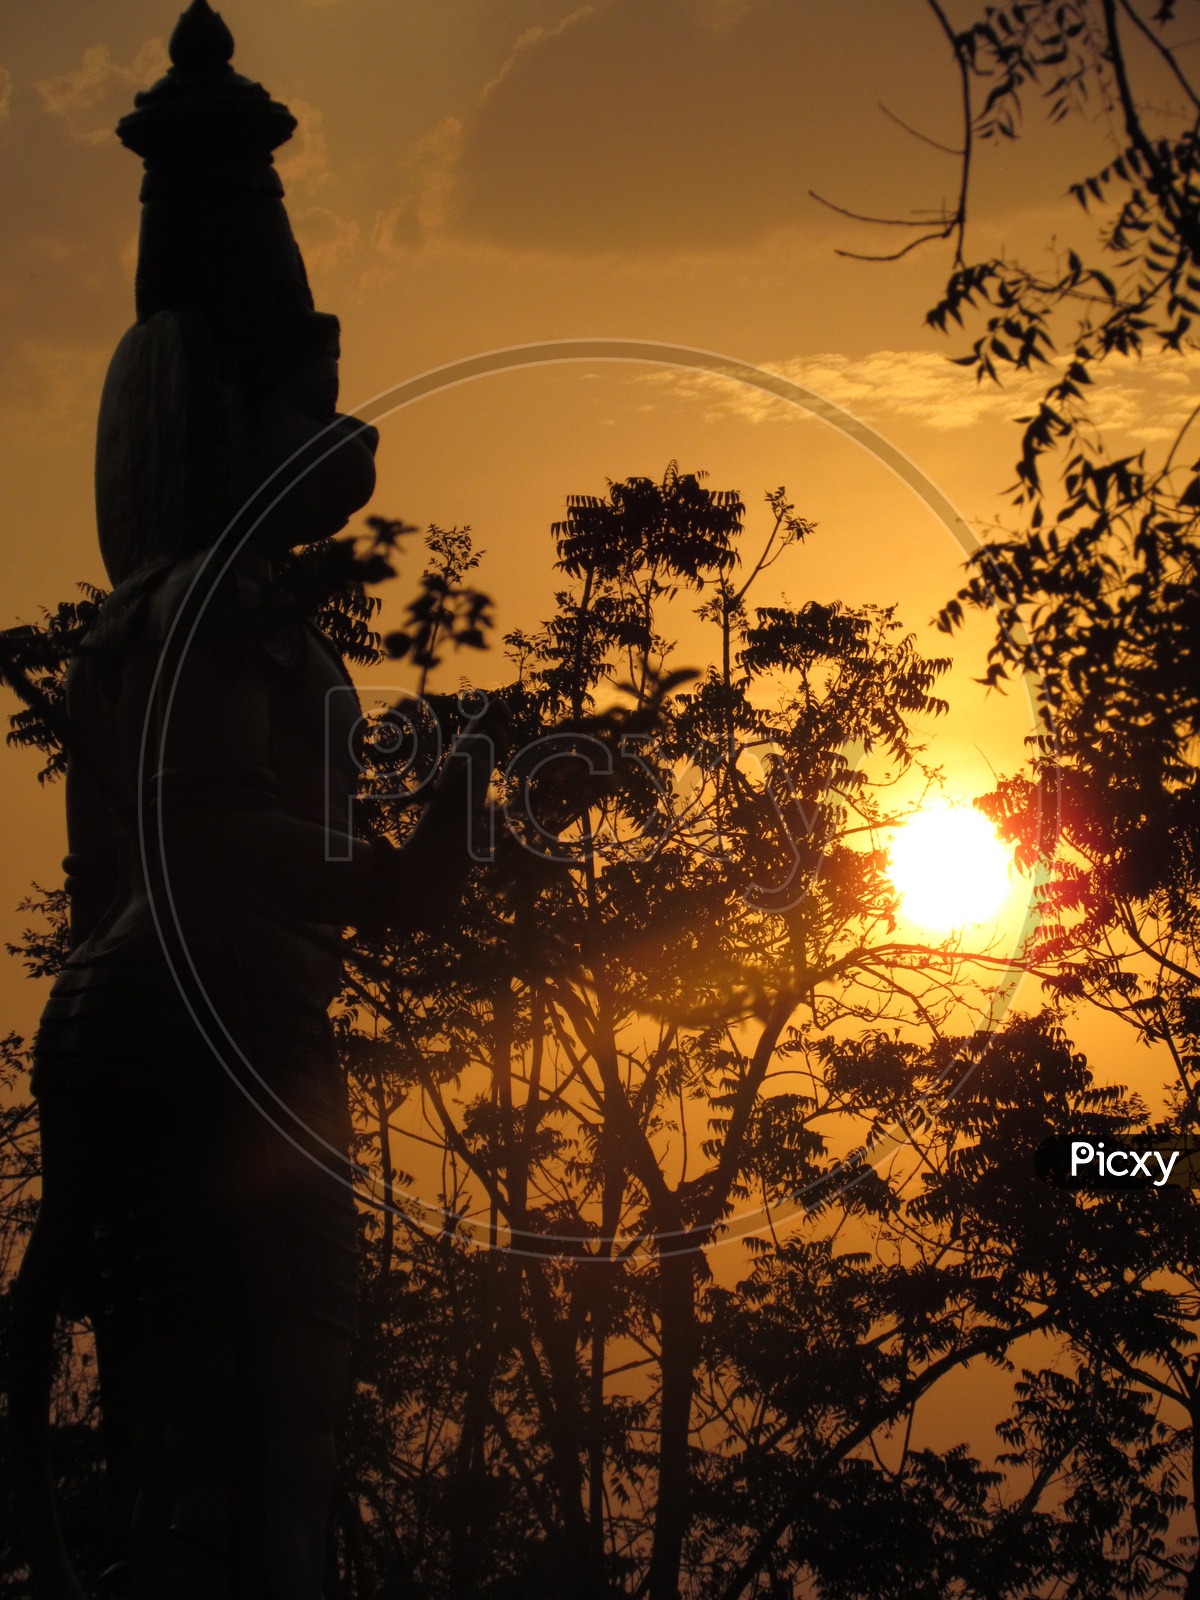 A Silhouette Of a Hanuman god Over a Golden Sun In Sky as background